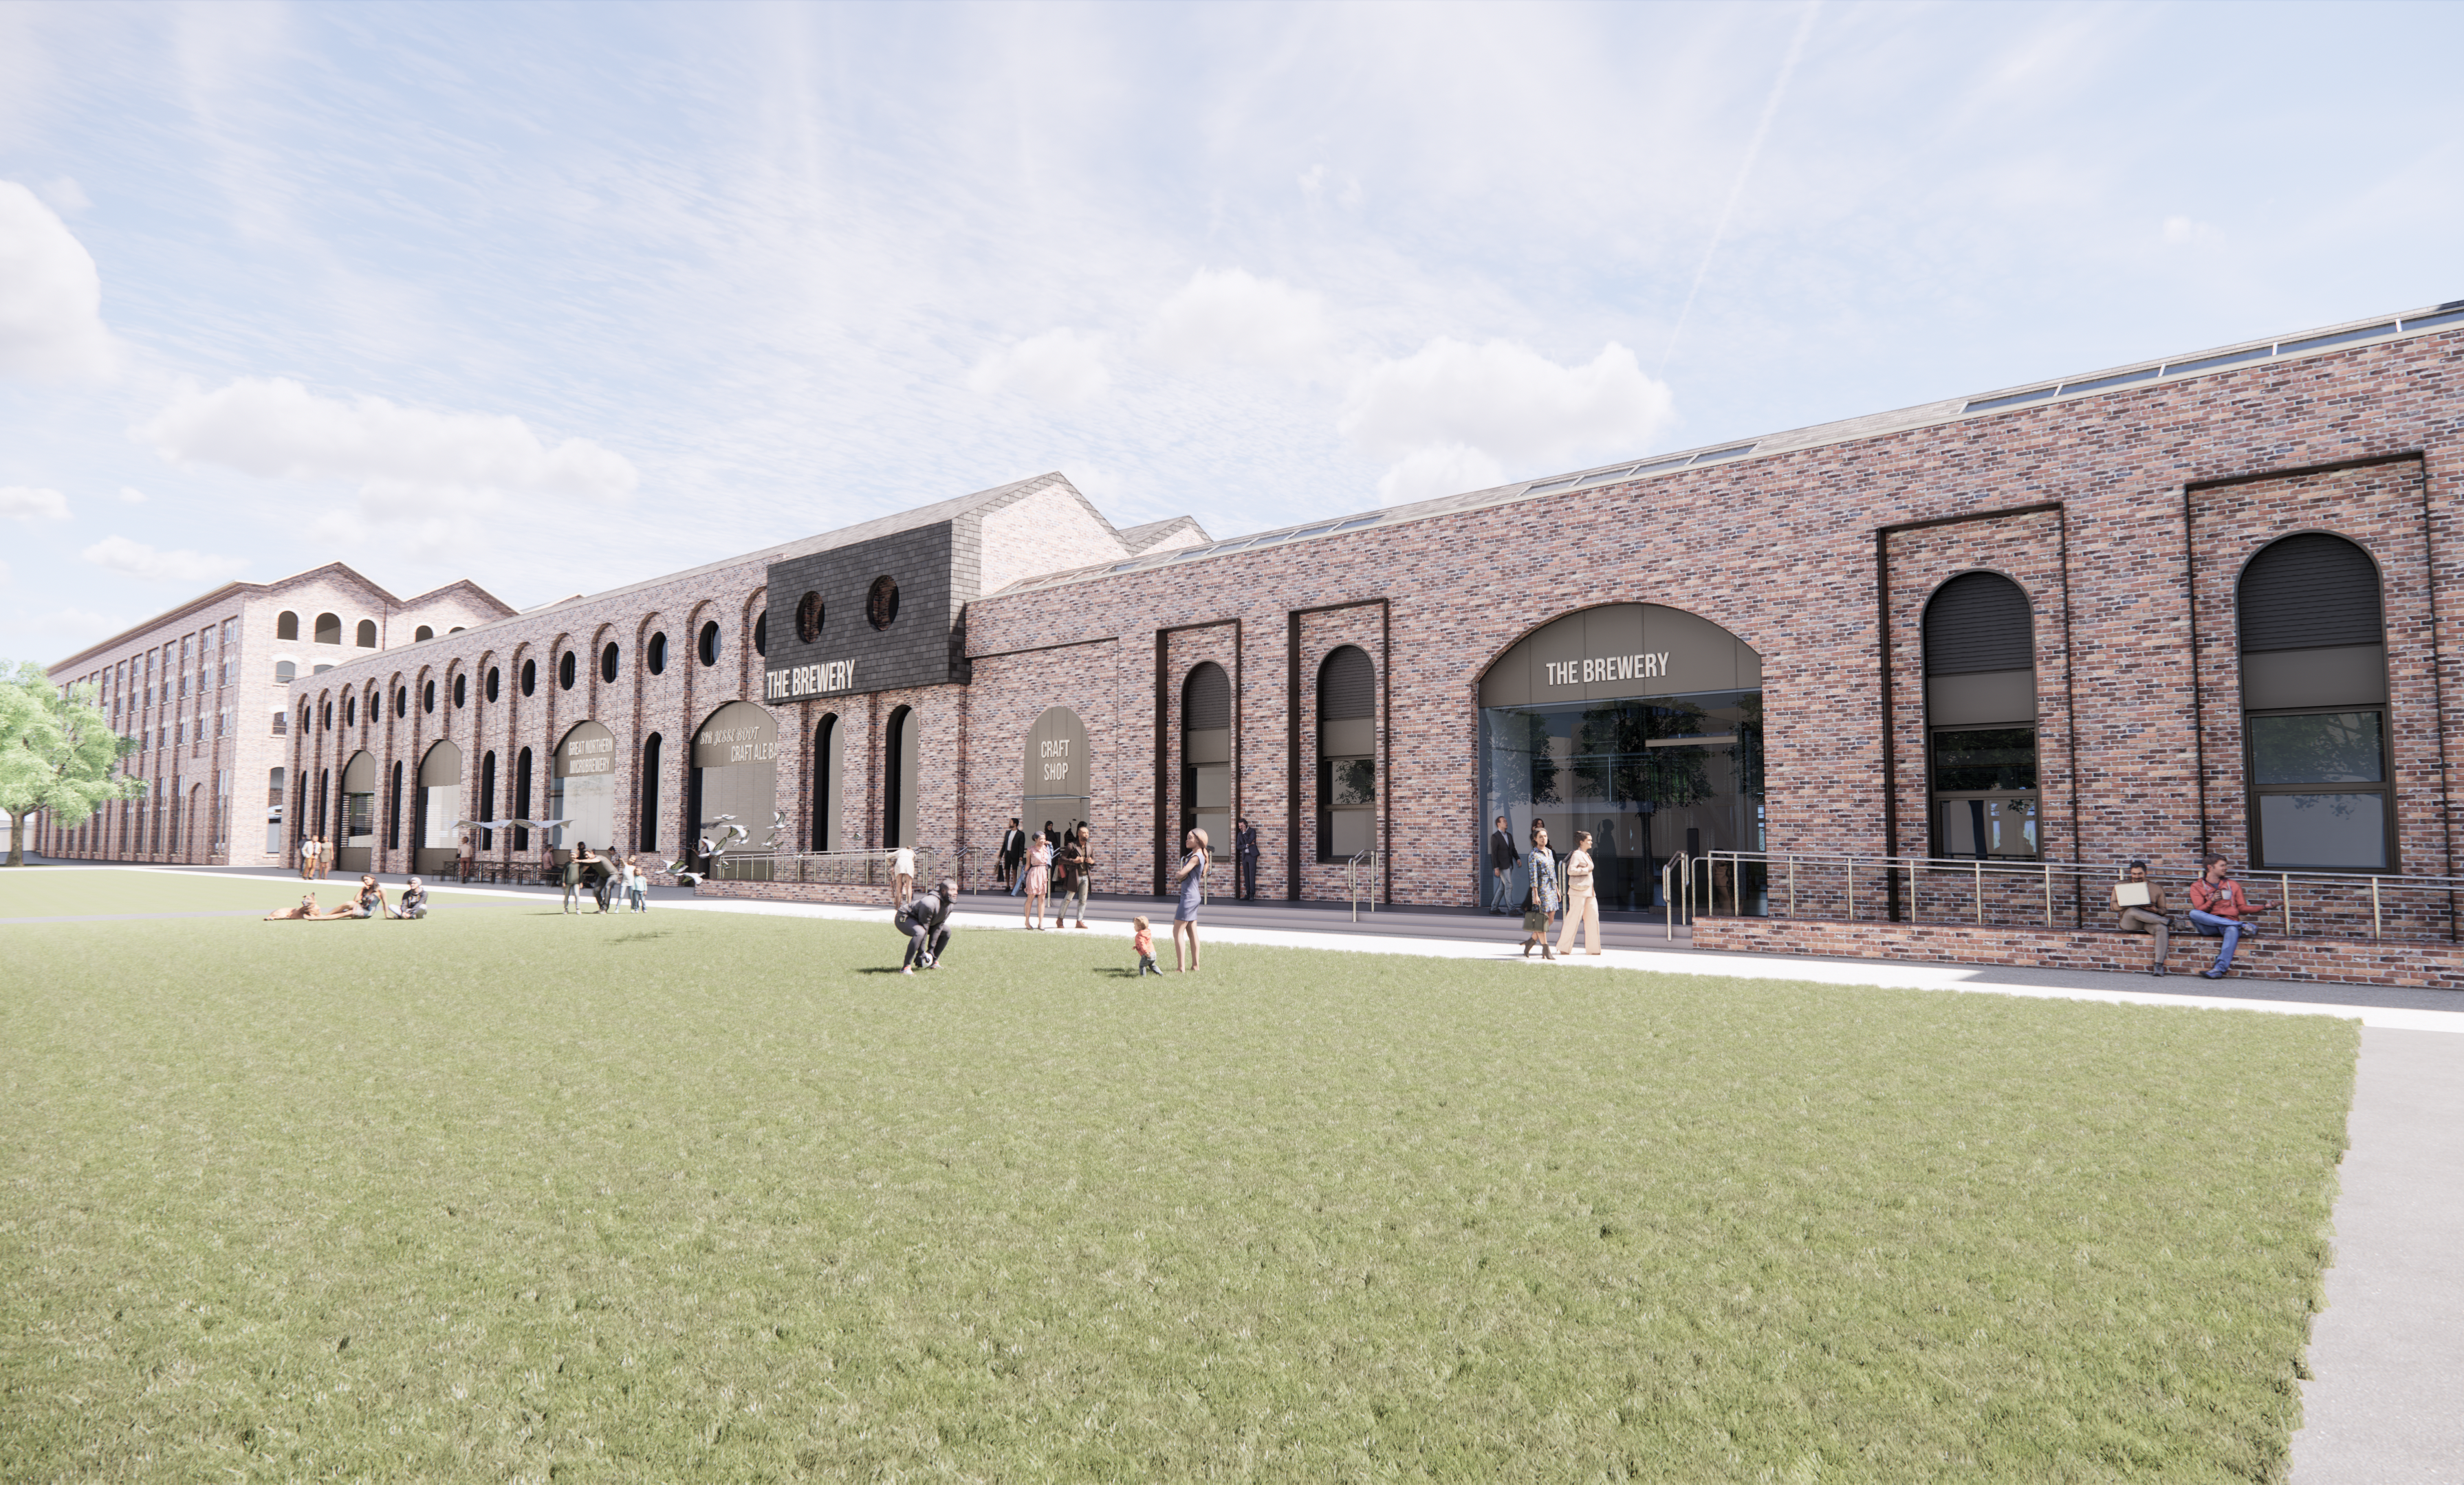 Concept for brewery business flagship headquarters incorporating a derelict grade II listed warehouse in Nottingham